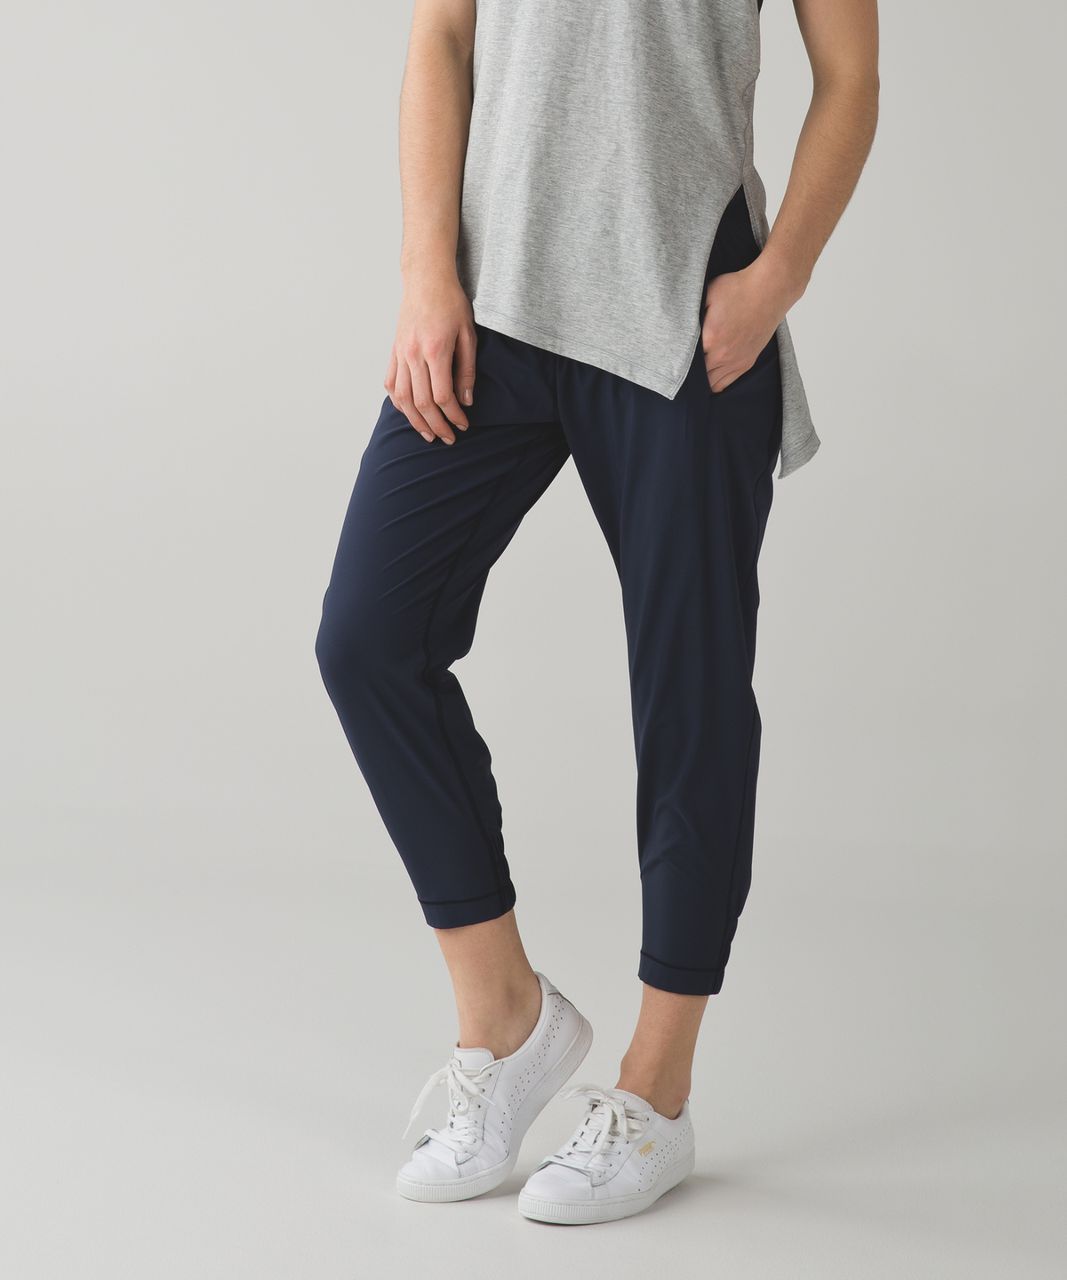 Do Lululemon Align Pants Stretch Out For 25